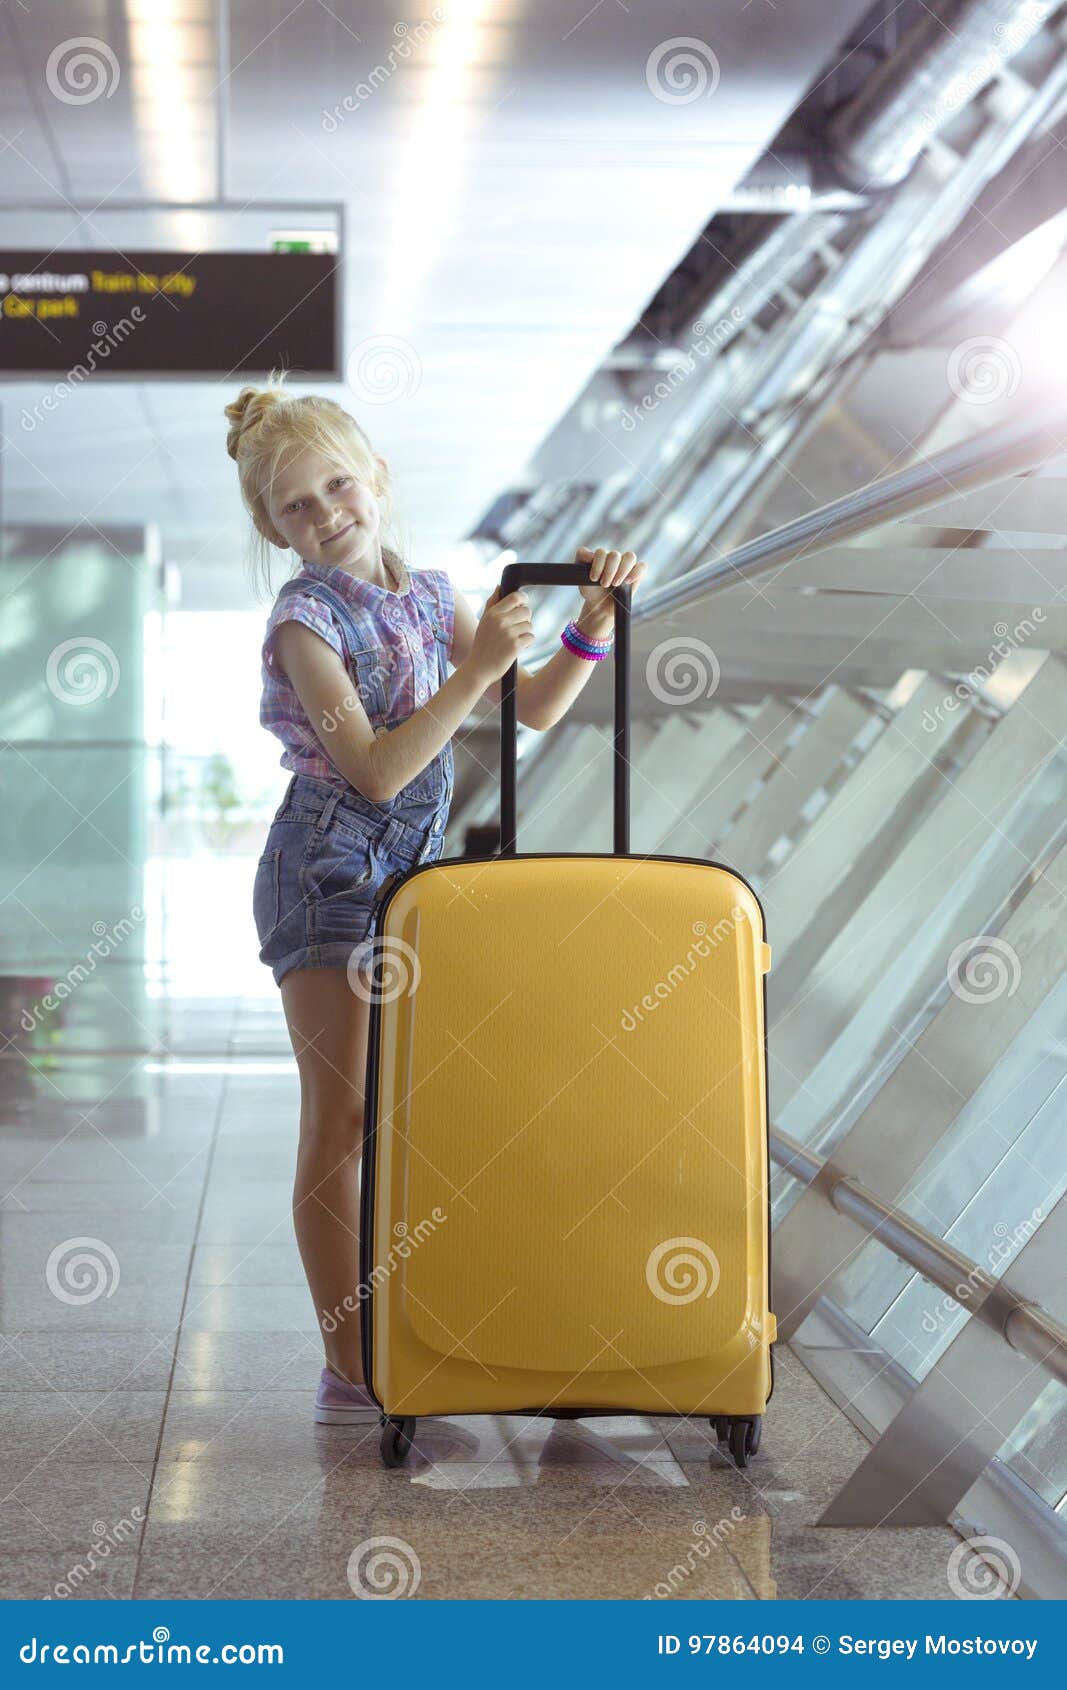 Girl and beautiful yellow suitcase stands in the airport corridor